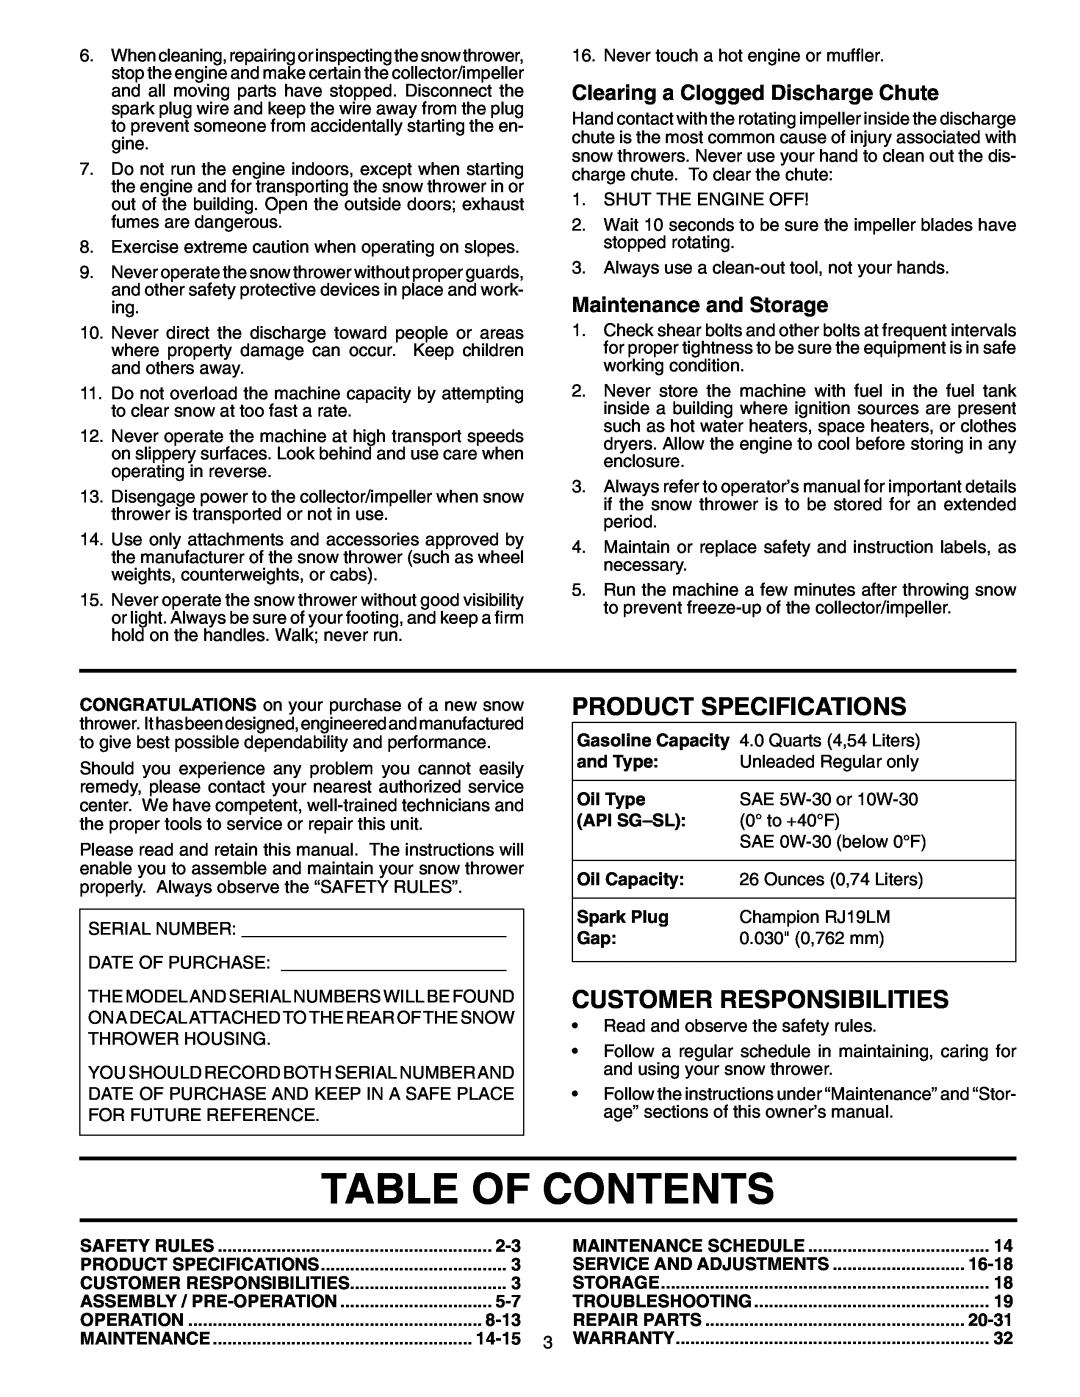 Poulan 199342 Table Of Contents, Clearing a Clogged Discharge Chute, Maintenance and Storage, Product Specifications 